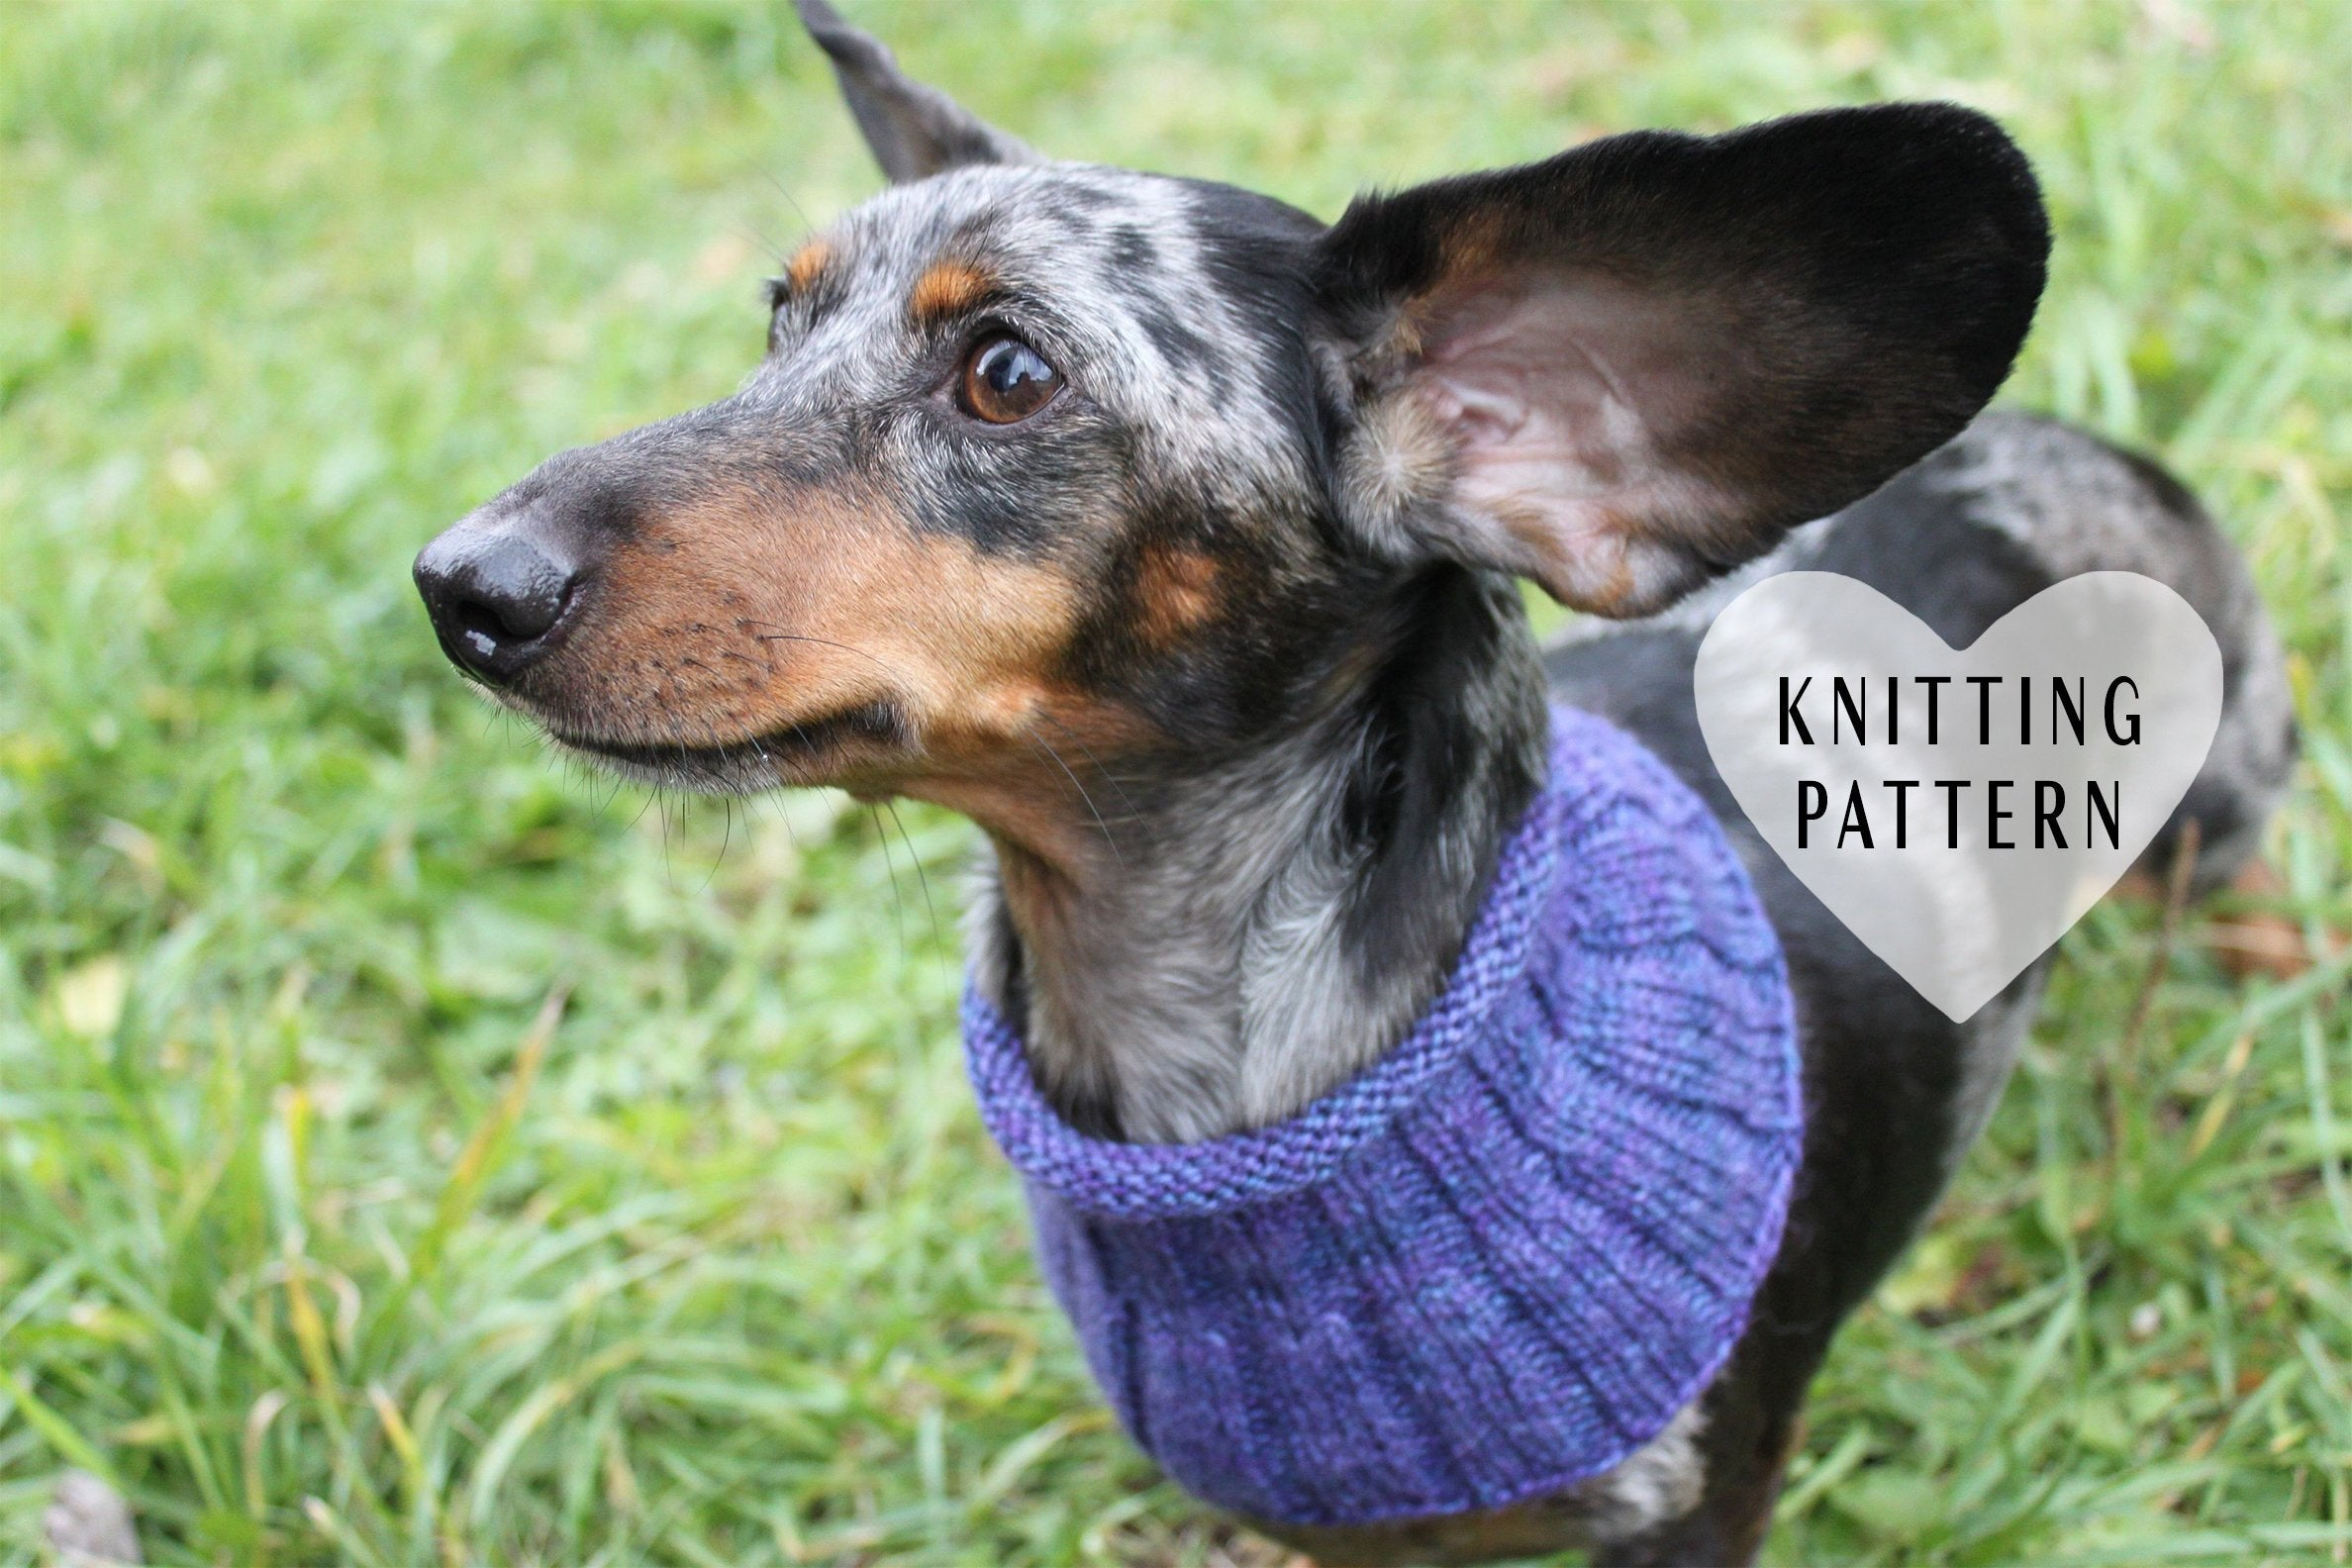 Small Dog Knitting Patterns Knitting Pattern Small Dog Cowl Neck Warmer Knitted Dog Cowl Dachshund Clothes Dog Clothes Miniatuer Dachshund Cowl Doxie Neck Warmer